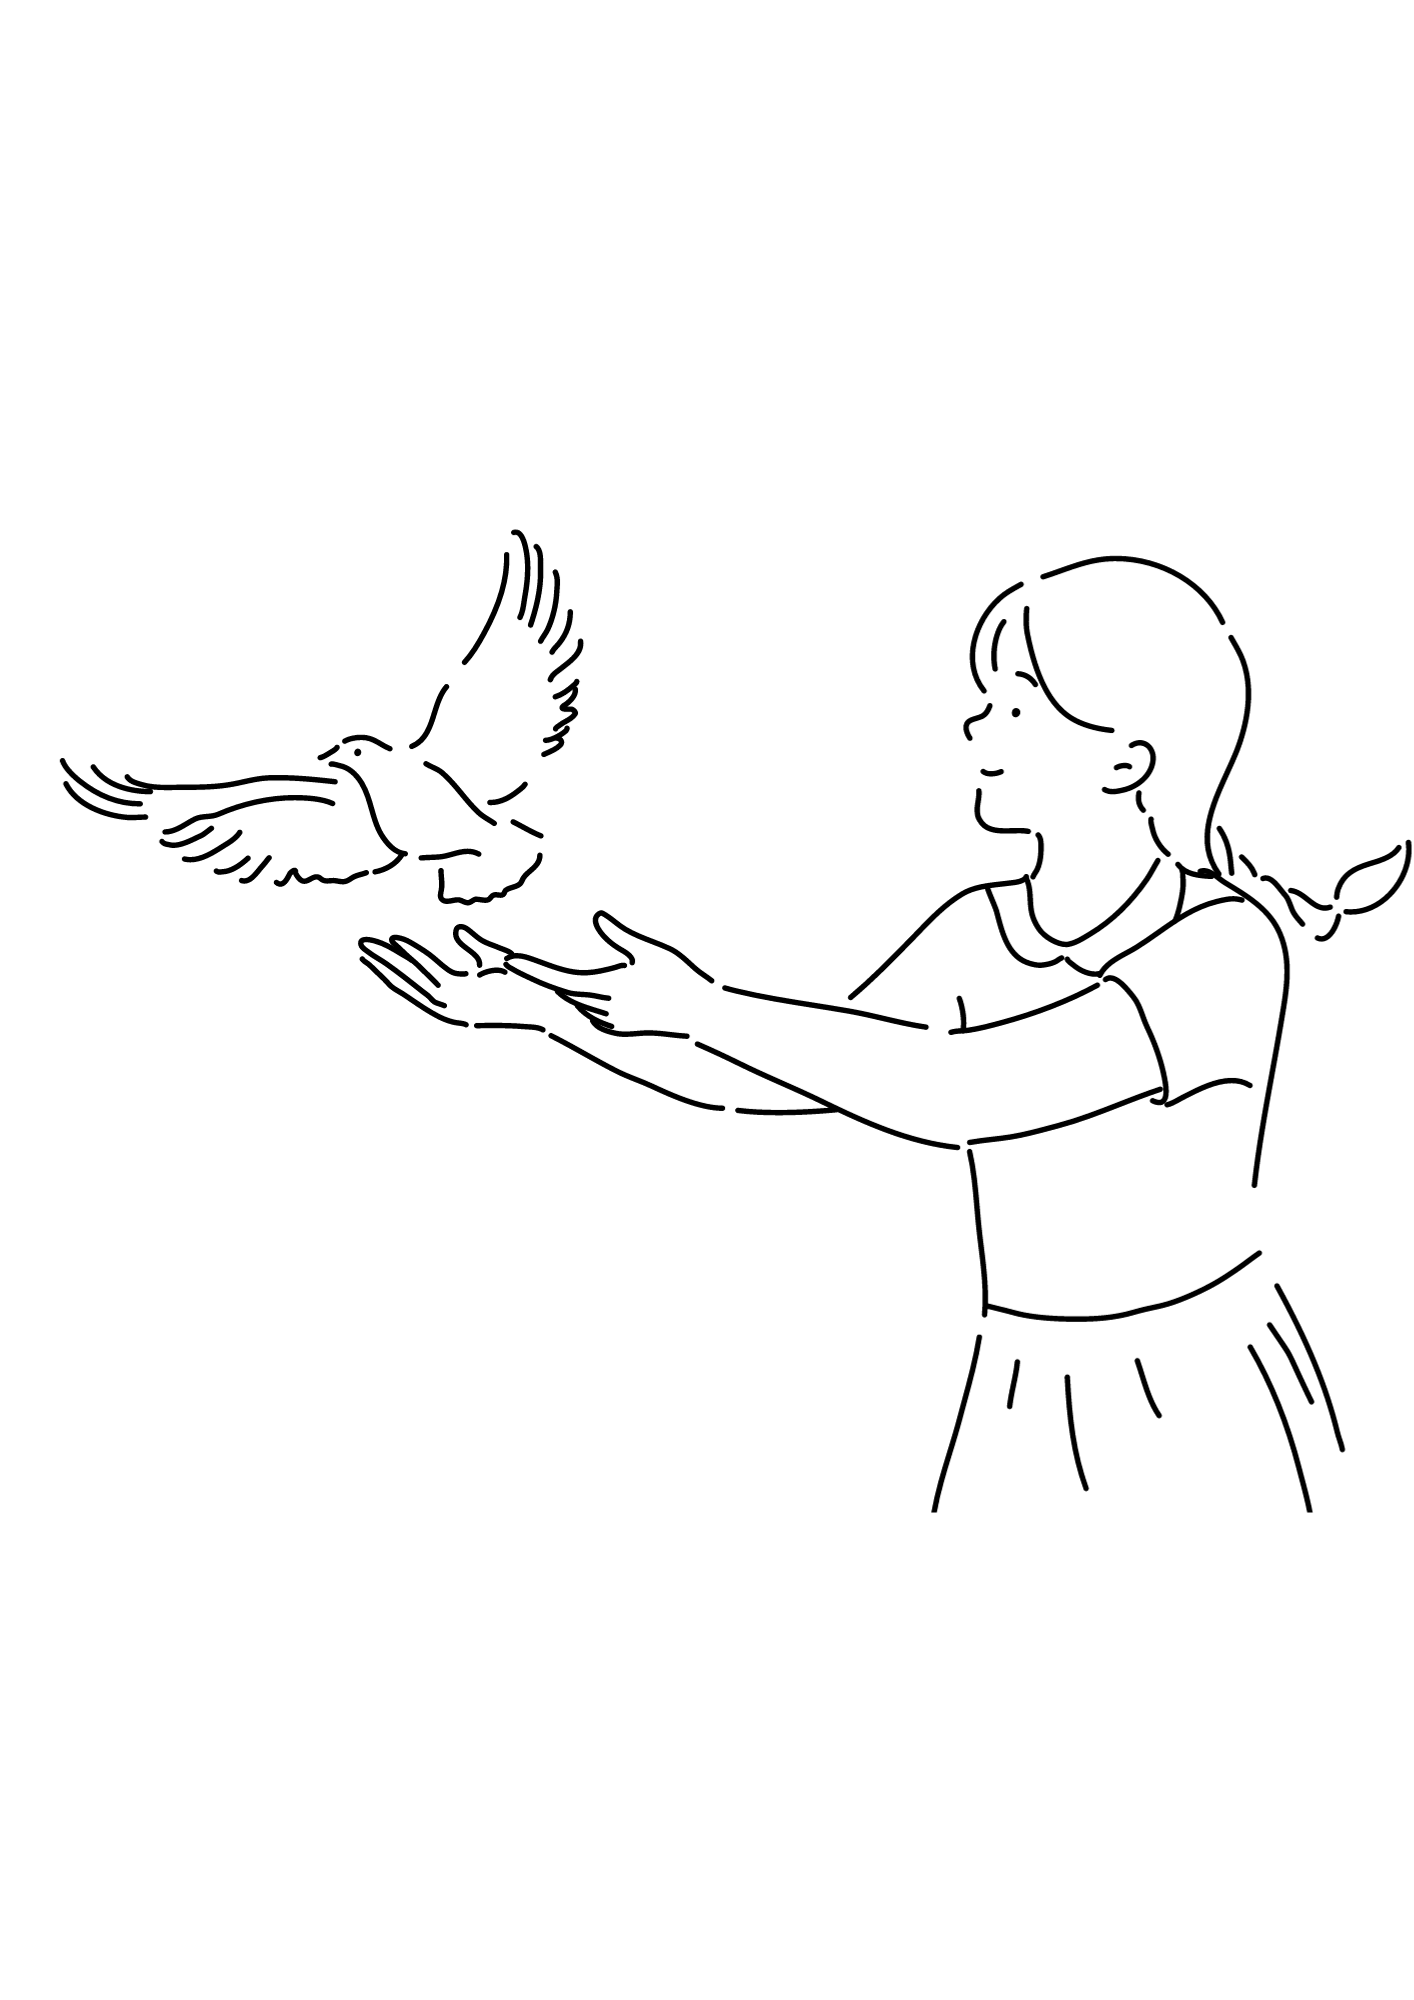 Girl Letting Go A White Dove Bird Coloring Page